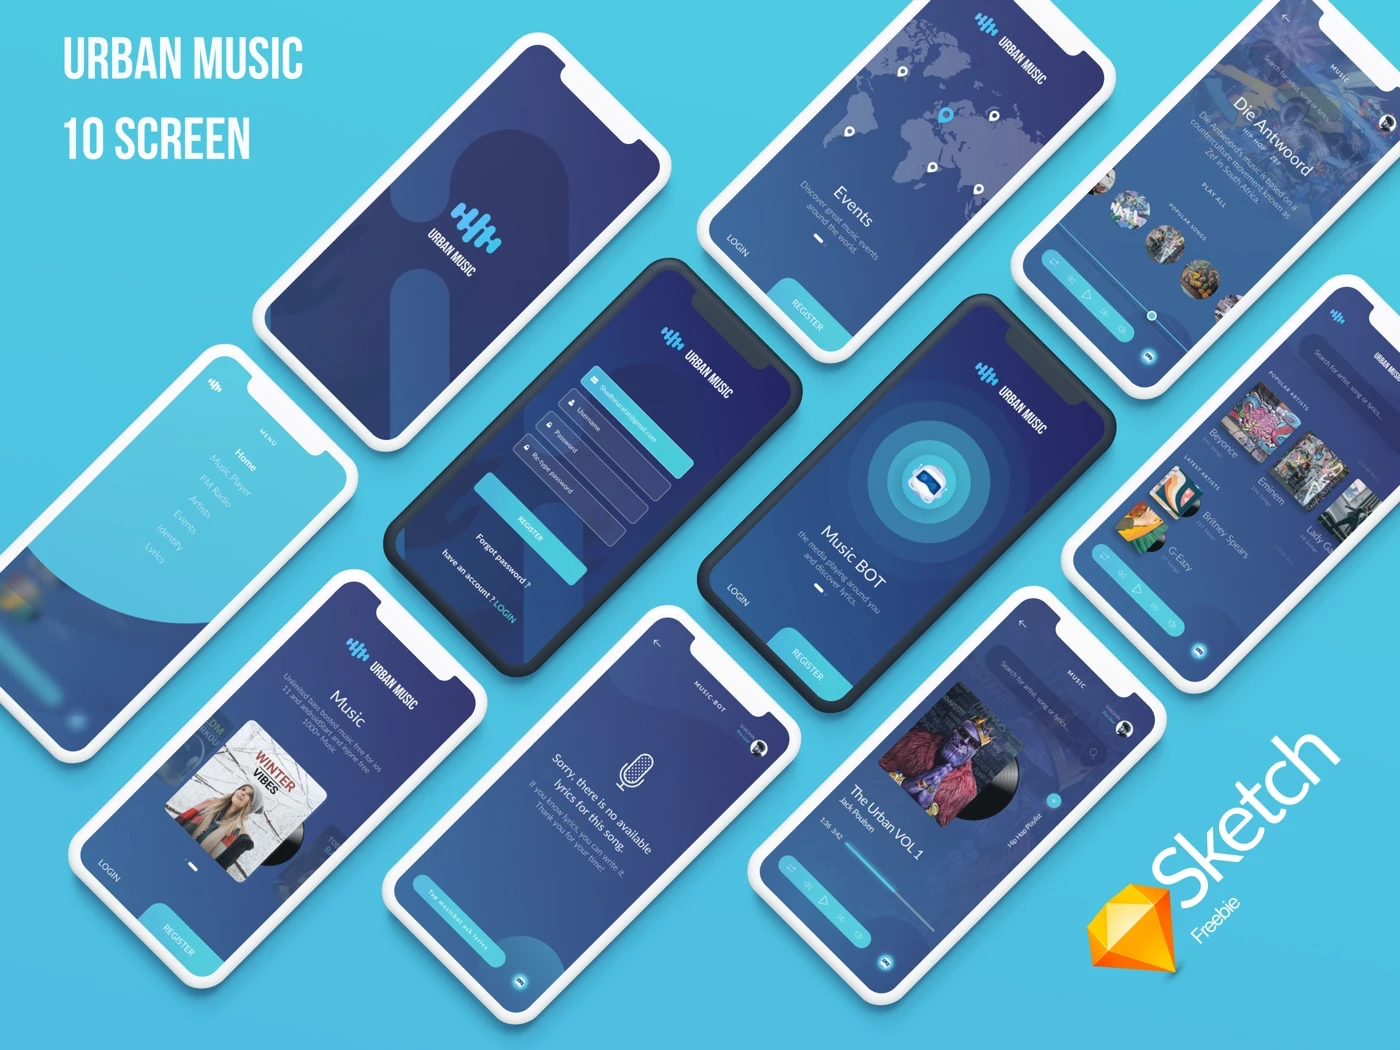 Urban Music UI Kit - Minimal and clean app design, 10 screens for you to get started